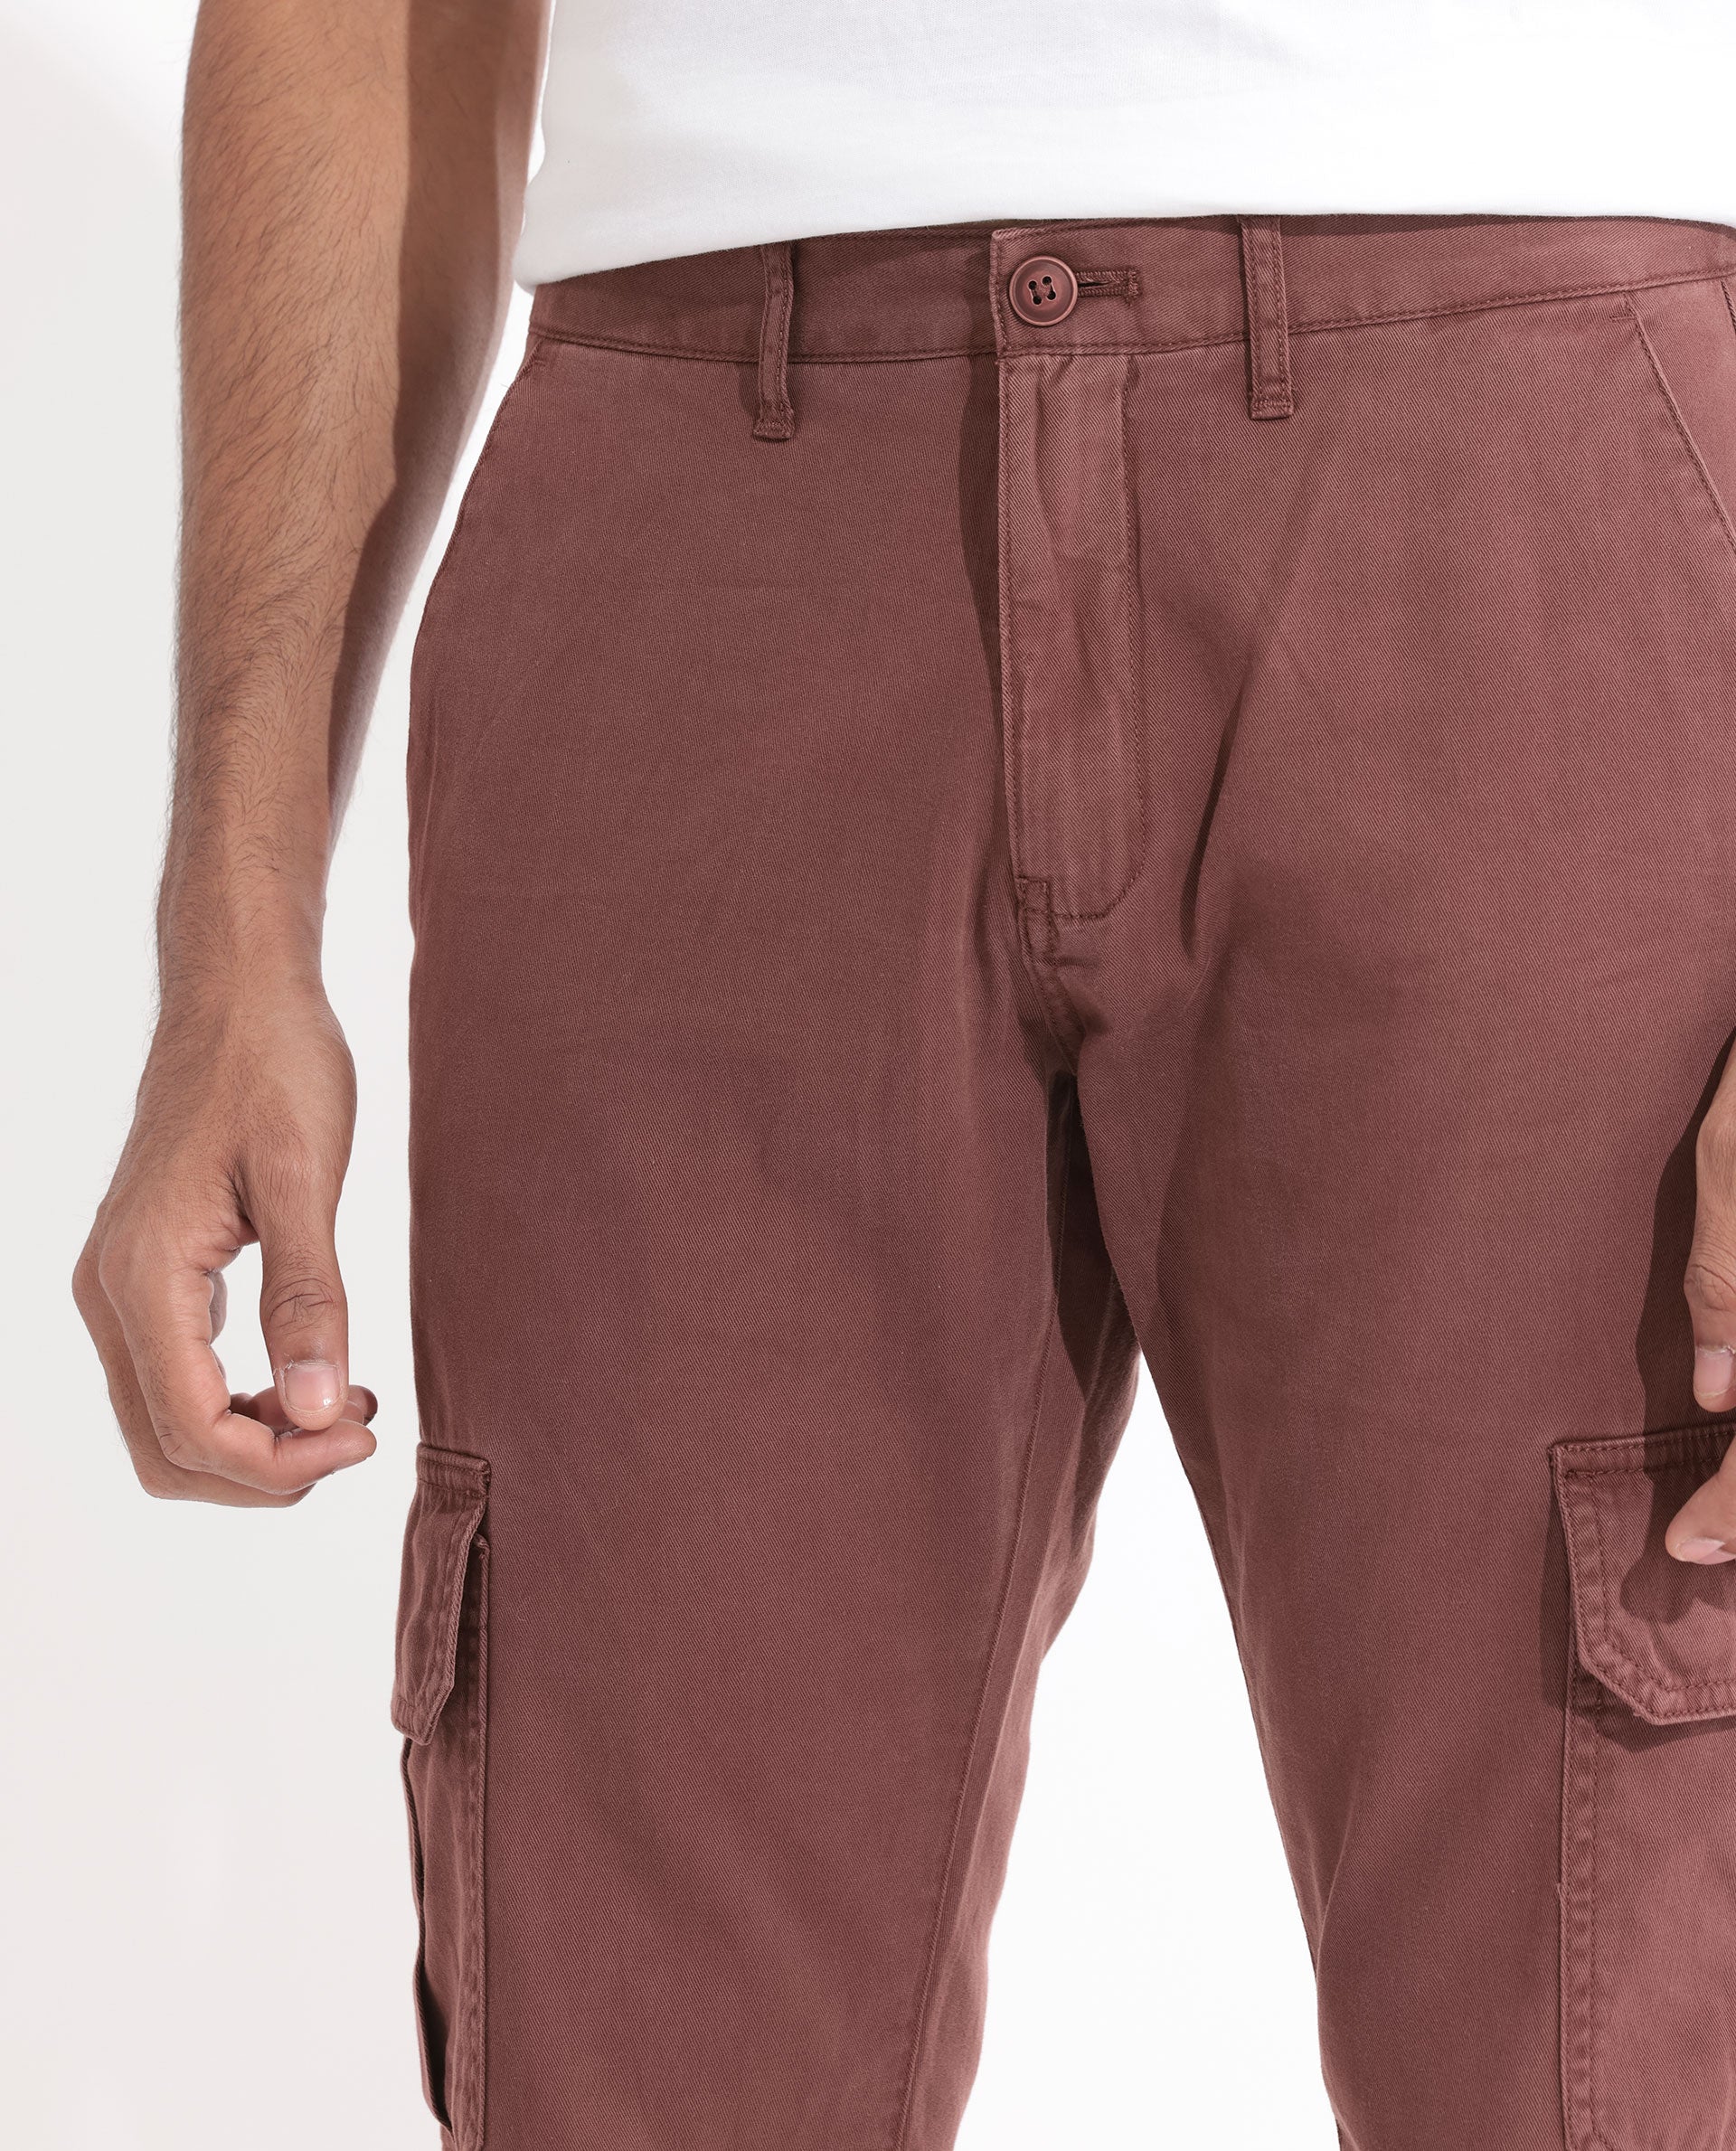 Trousers with pockets in light brown, 14.99€ | Celestino